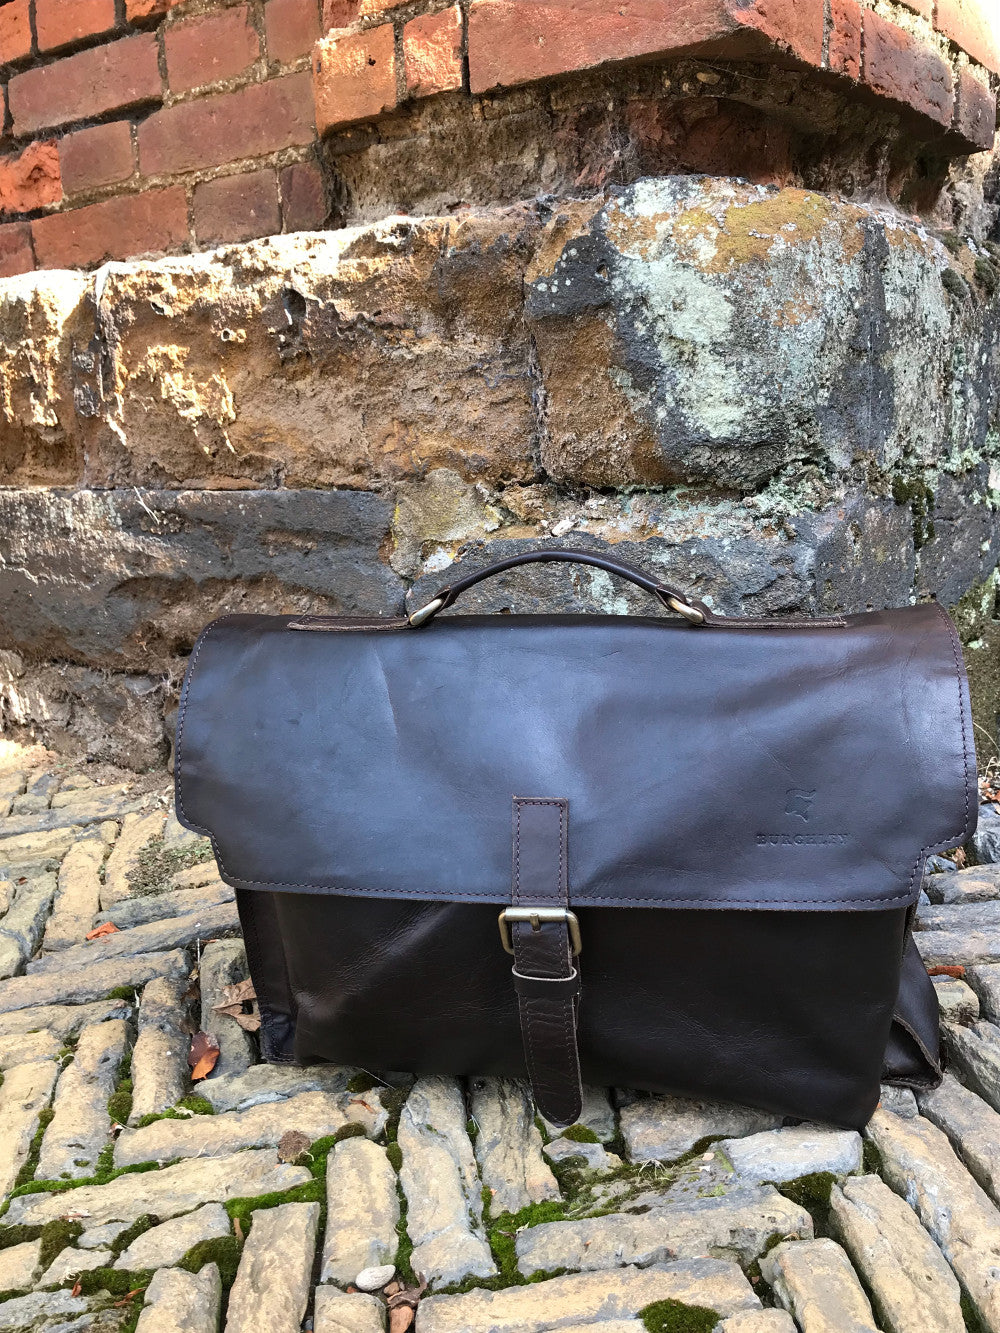 The Dorrington Briefcase. A classic 30's styled leather briefcase by Burghley Bags. A handmade leather vintage work bag, with enough space for 15" laptops. Comes with an adjustable and detachable shoulder strap. Shown in classic dark brown.